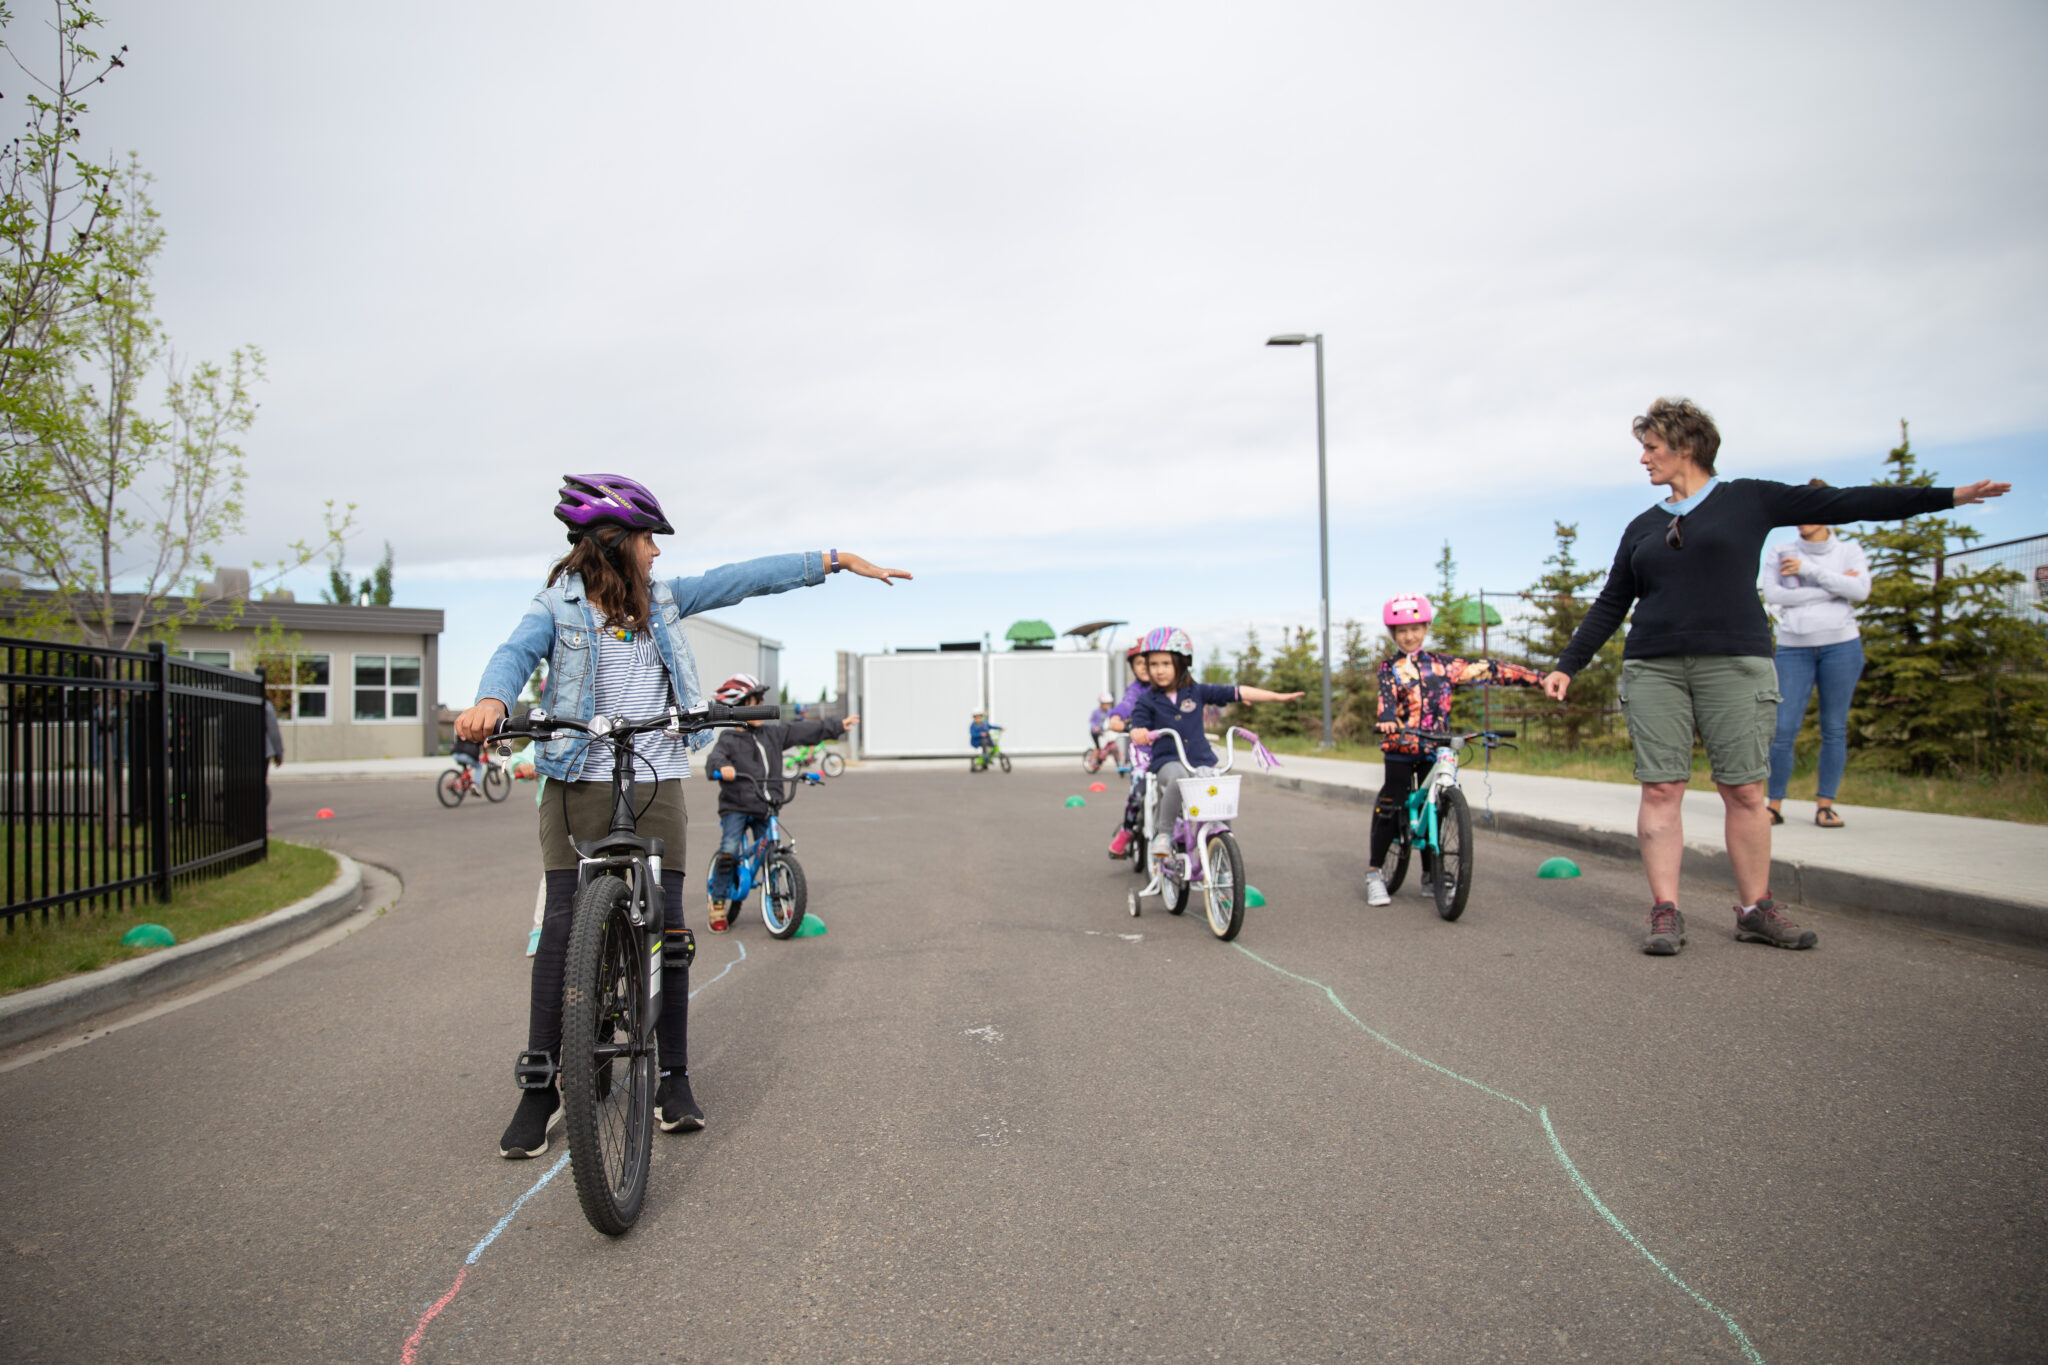 A group of children on bikes practices signalling a left turn with their arms.